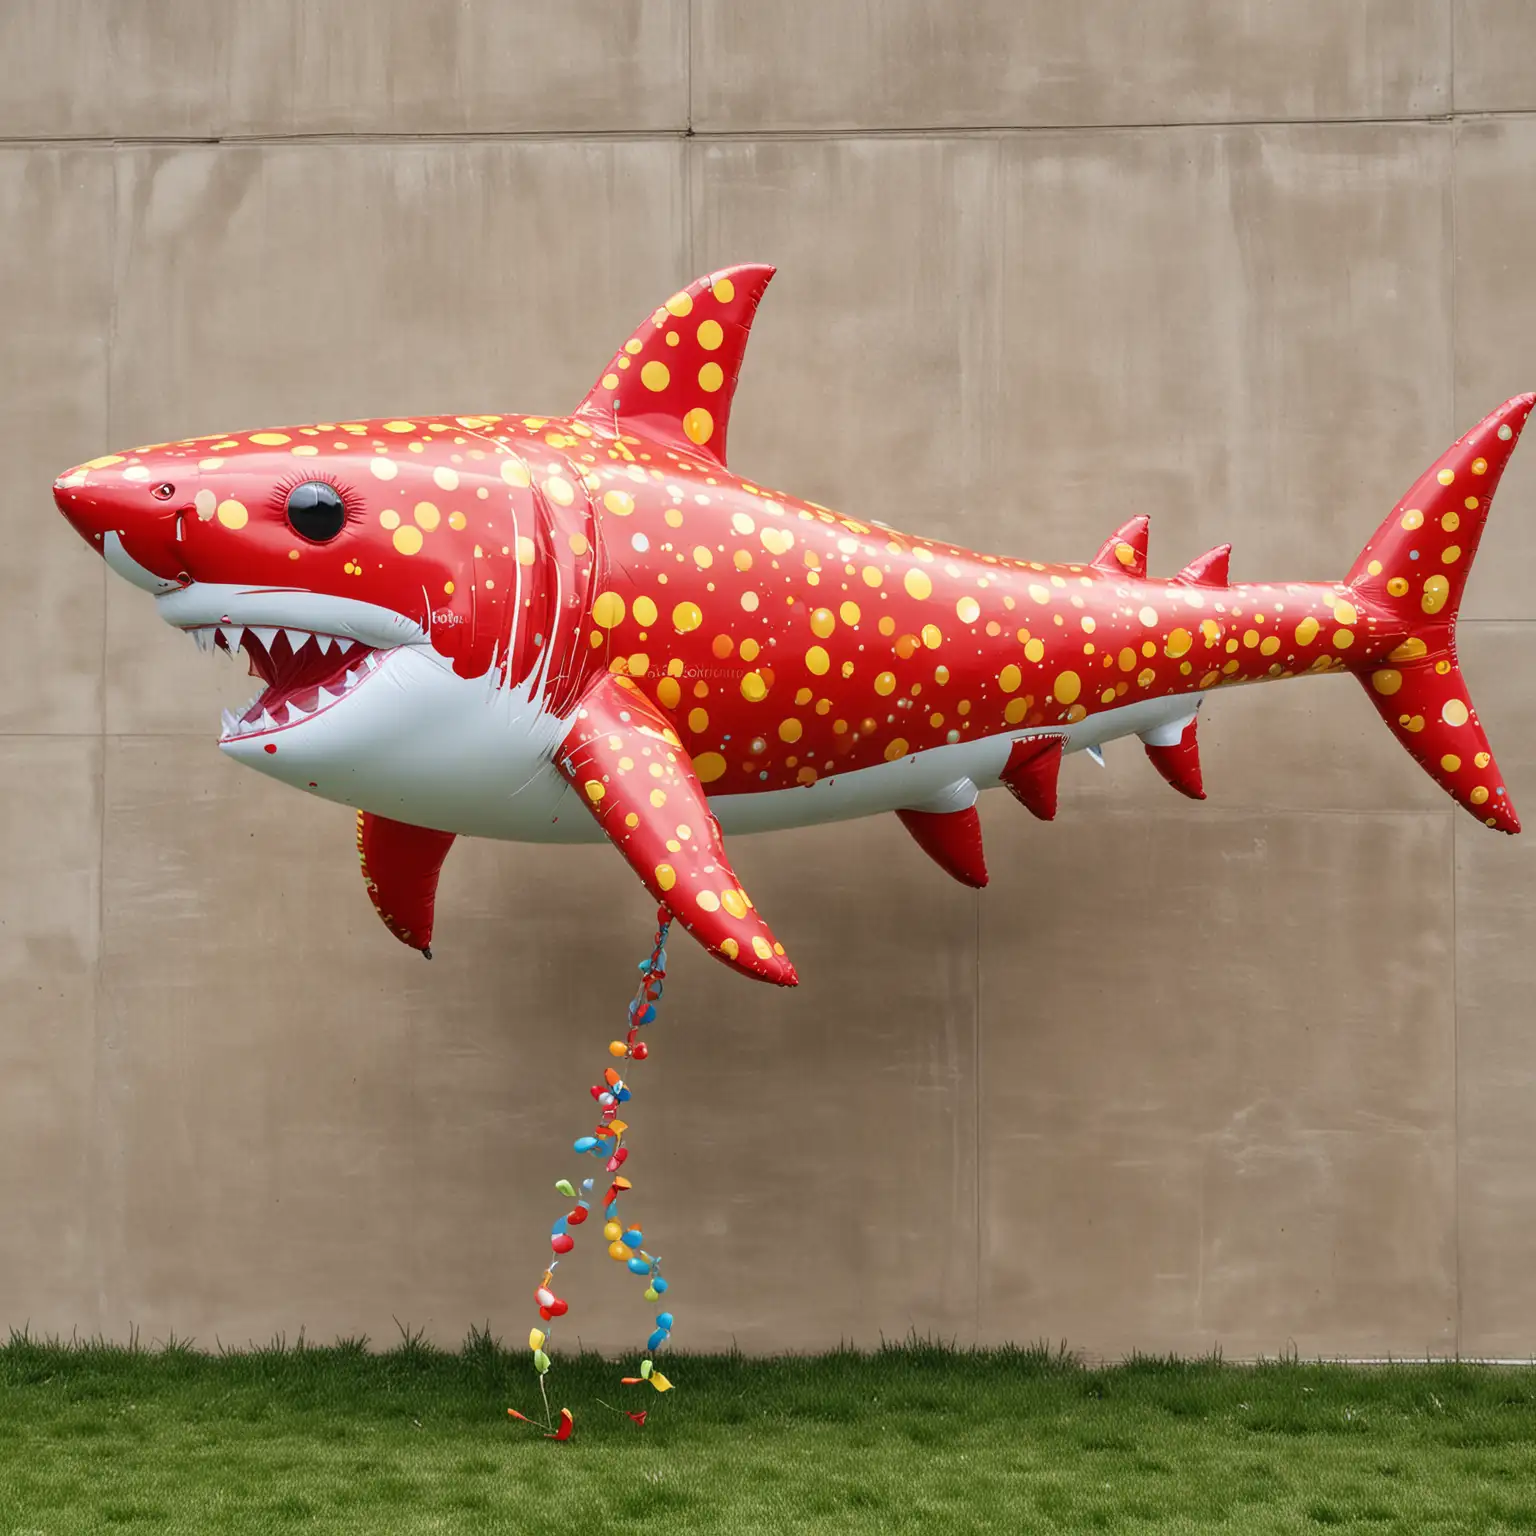 big festival balloon shark, red with yellow dots